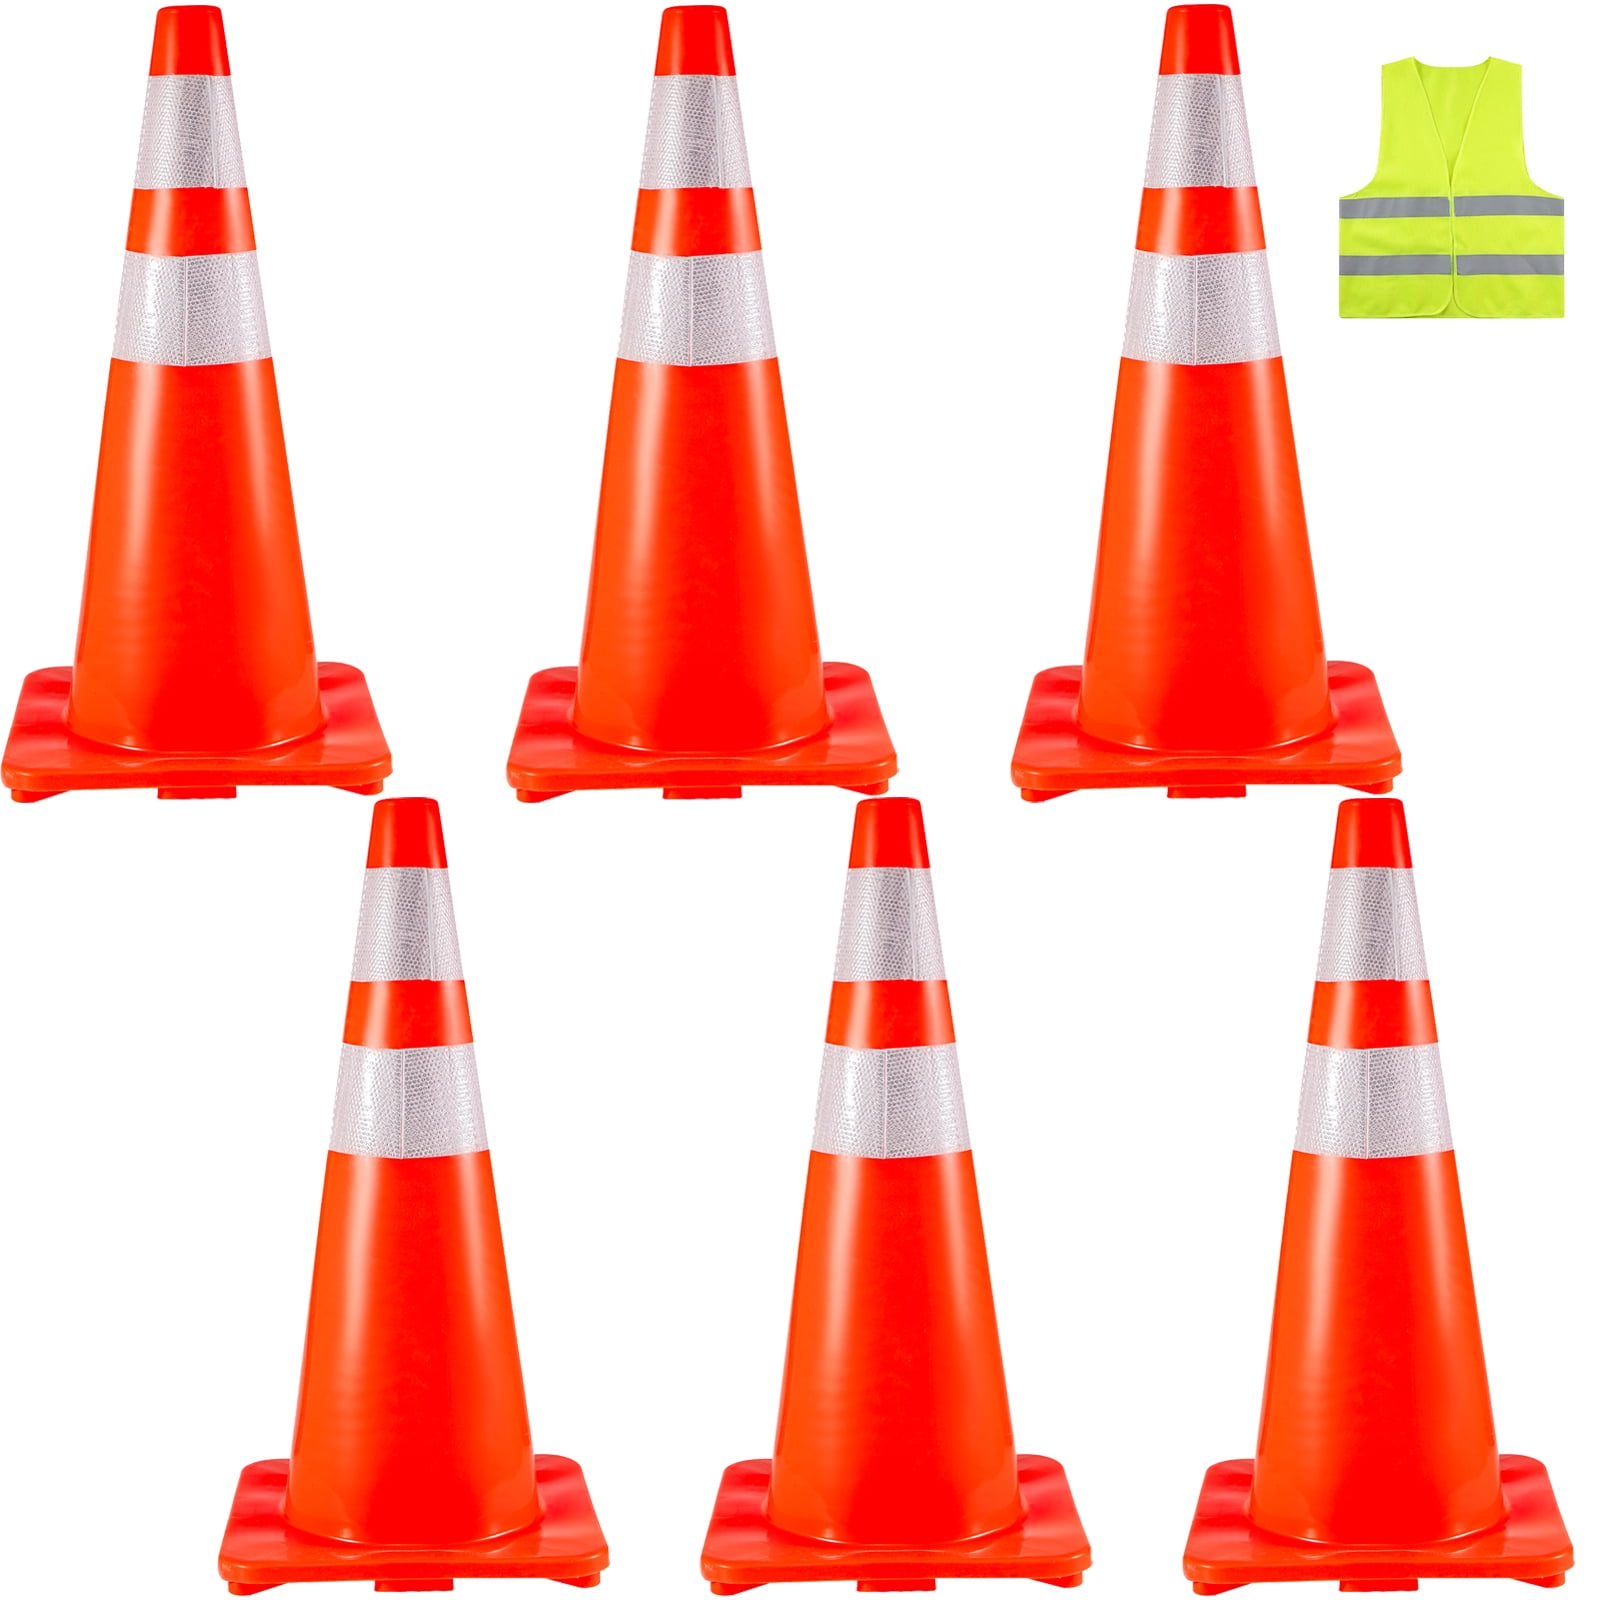 Safety Road Parking Cones PVC Base Hazard Construction Cones with Reflective Collars for Home Traffic Parking VEVOR 6Pack 28 Traffic Cones Traffic Safety Cone Orange